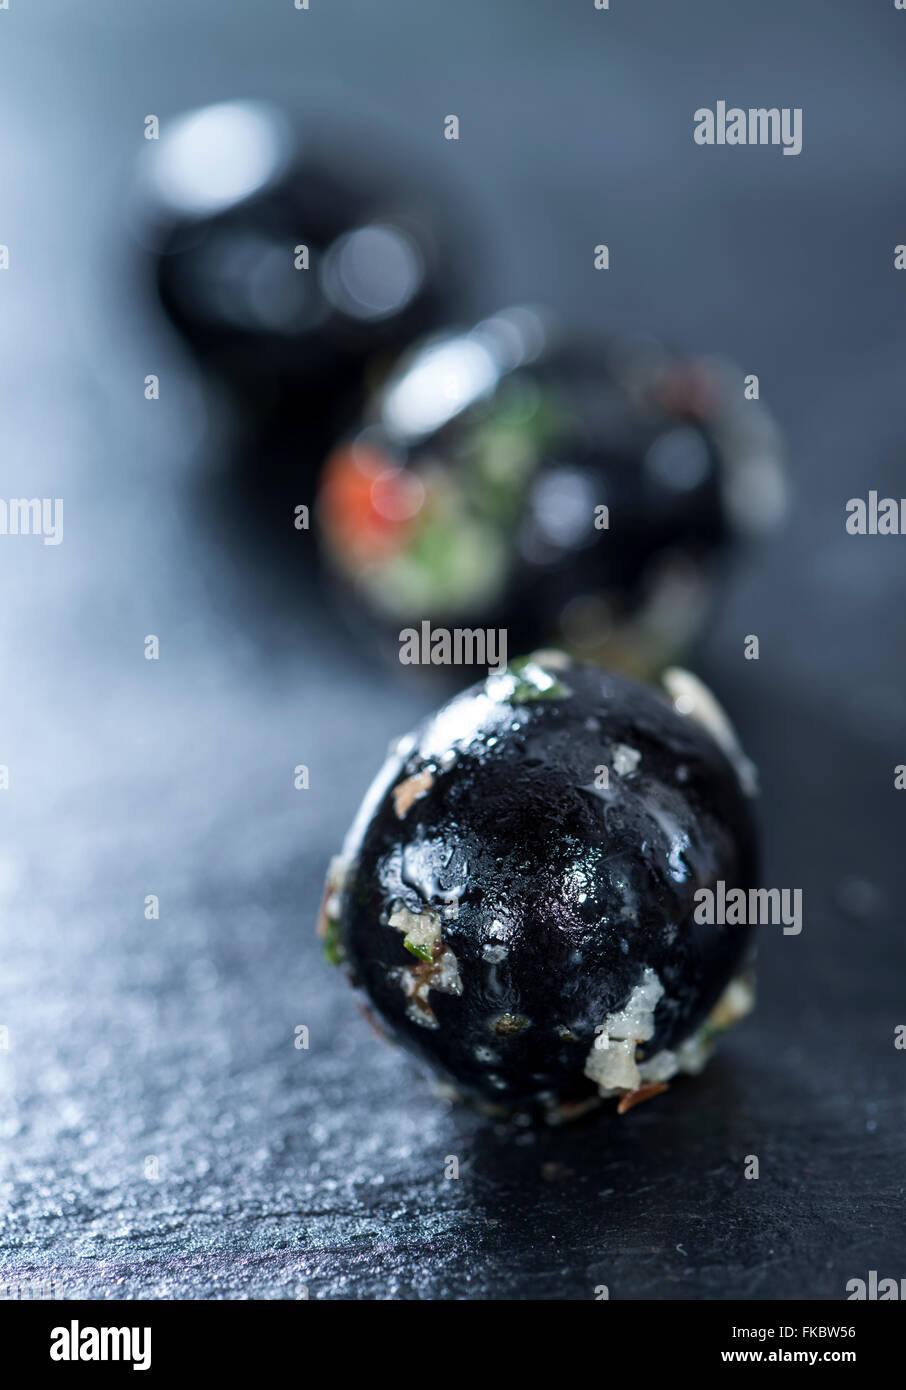 Portion of pickled black Olives with garlic and fresh herbs (close-up shot) Stock Photo